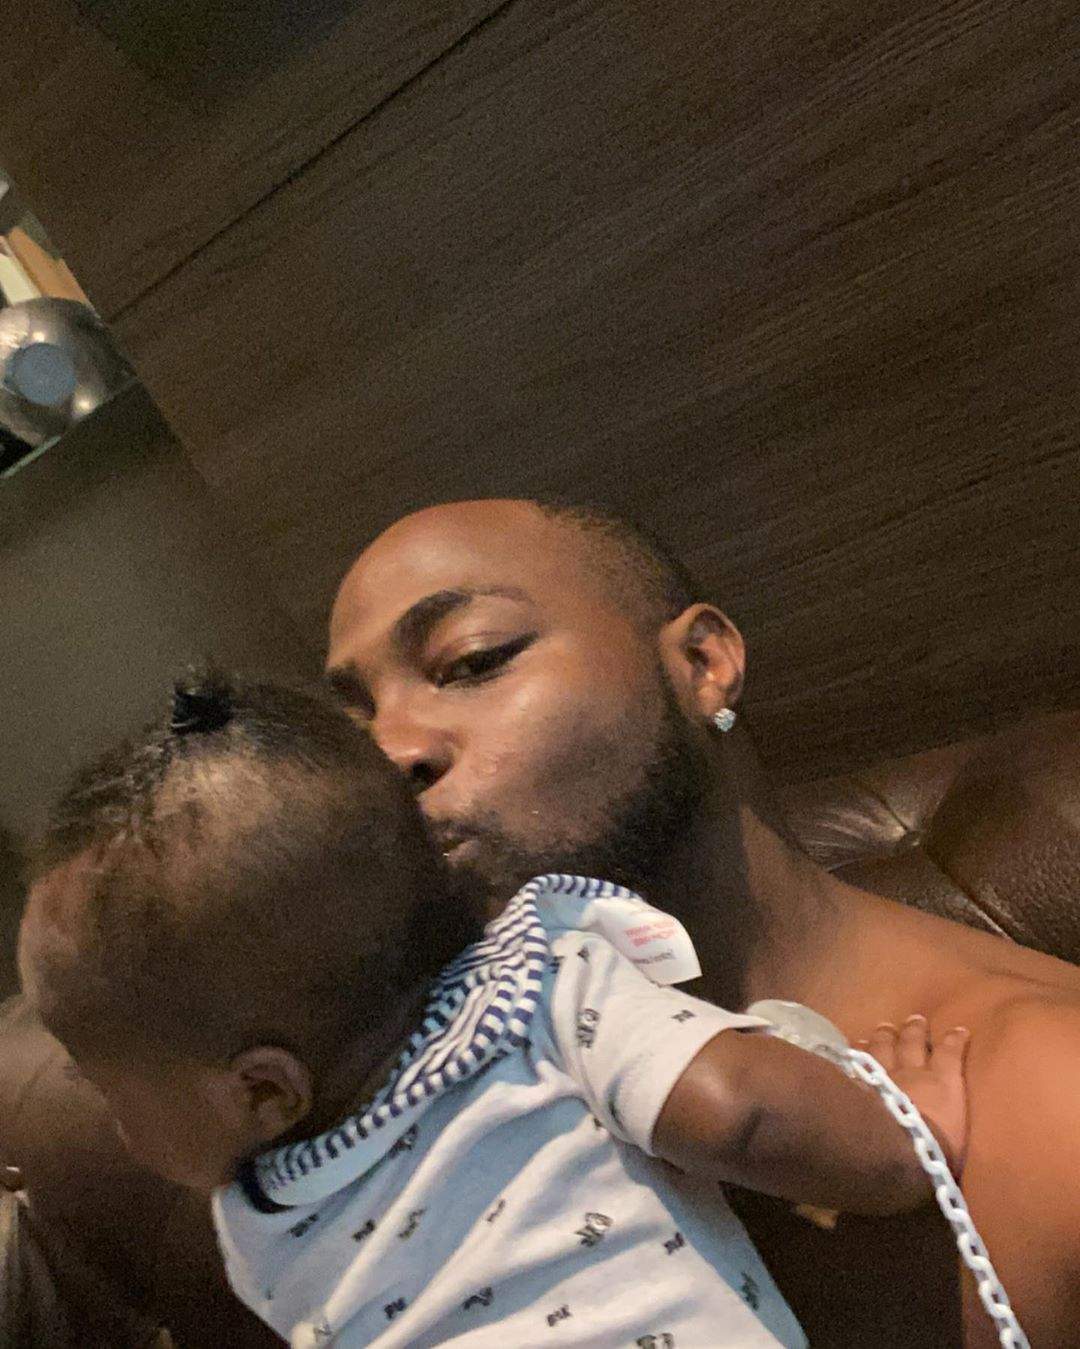 Davido's son speaks first words; says 'dada' in new video (WATCH)